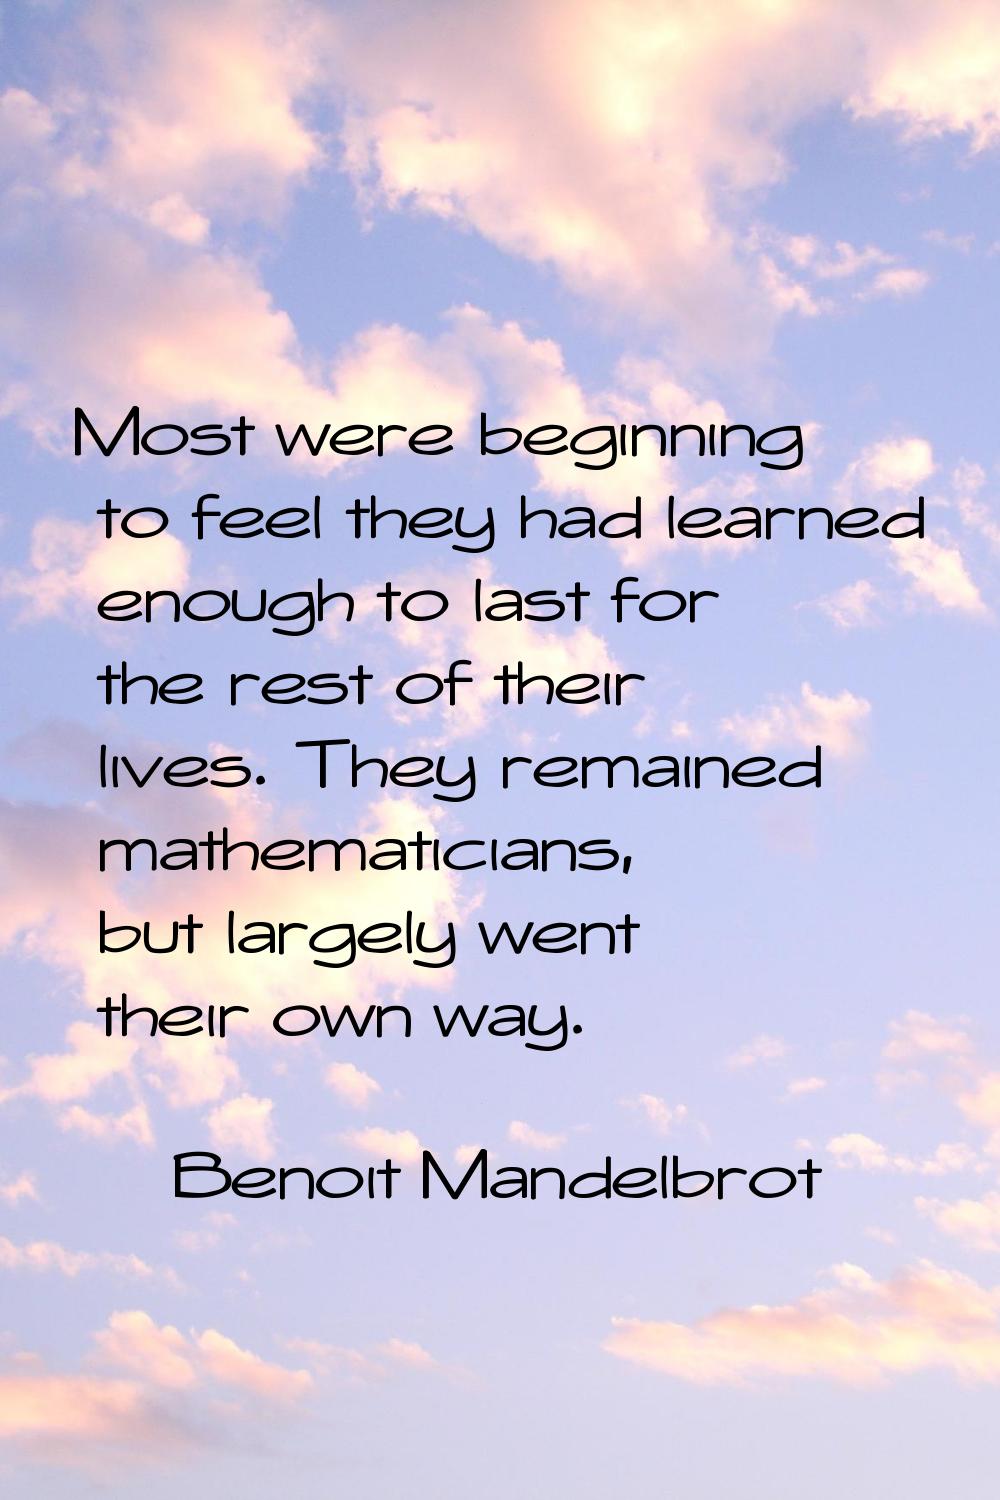 Most were beginning to feel they had learned enough to last for the rest of their lives. They remai